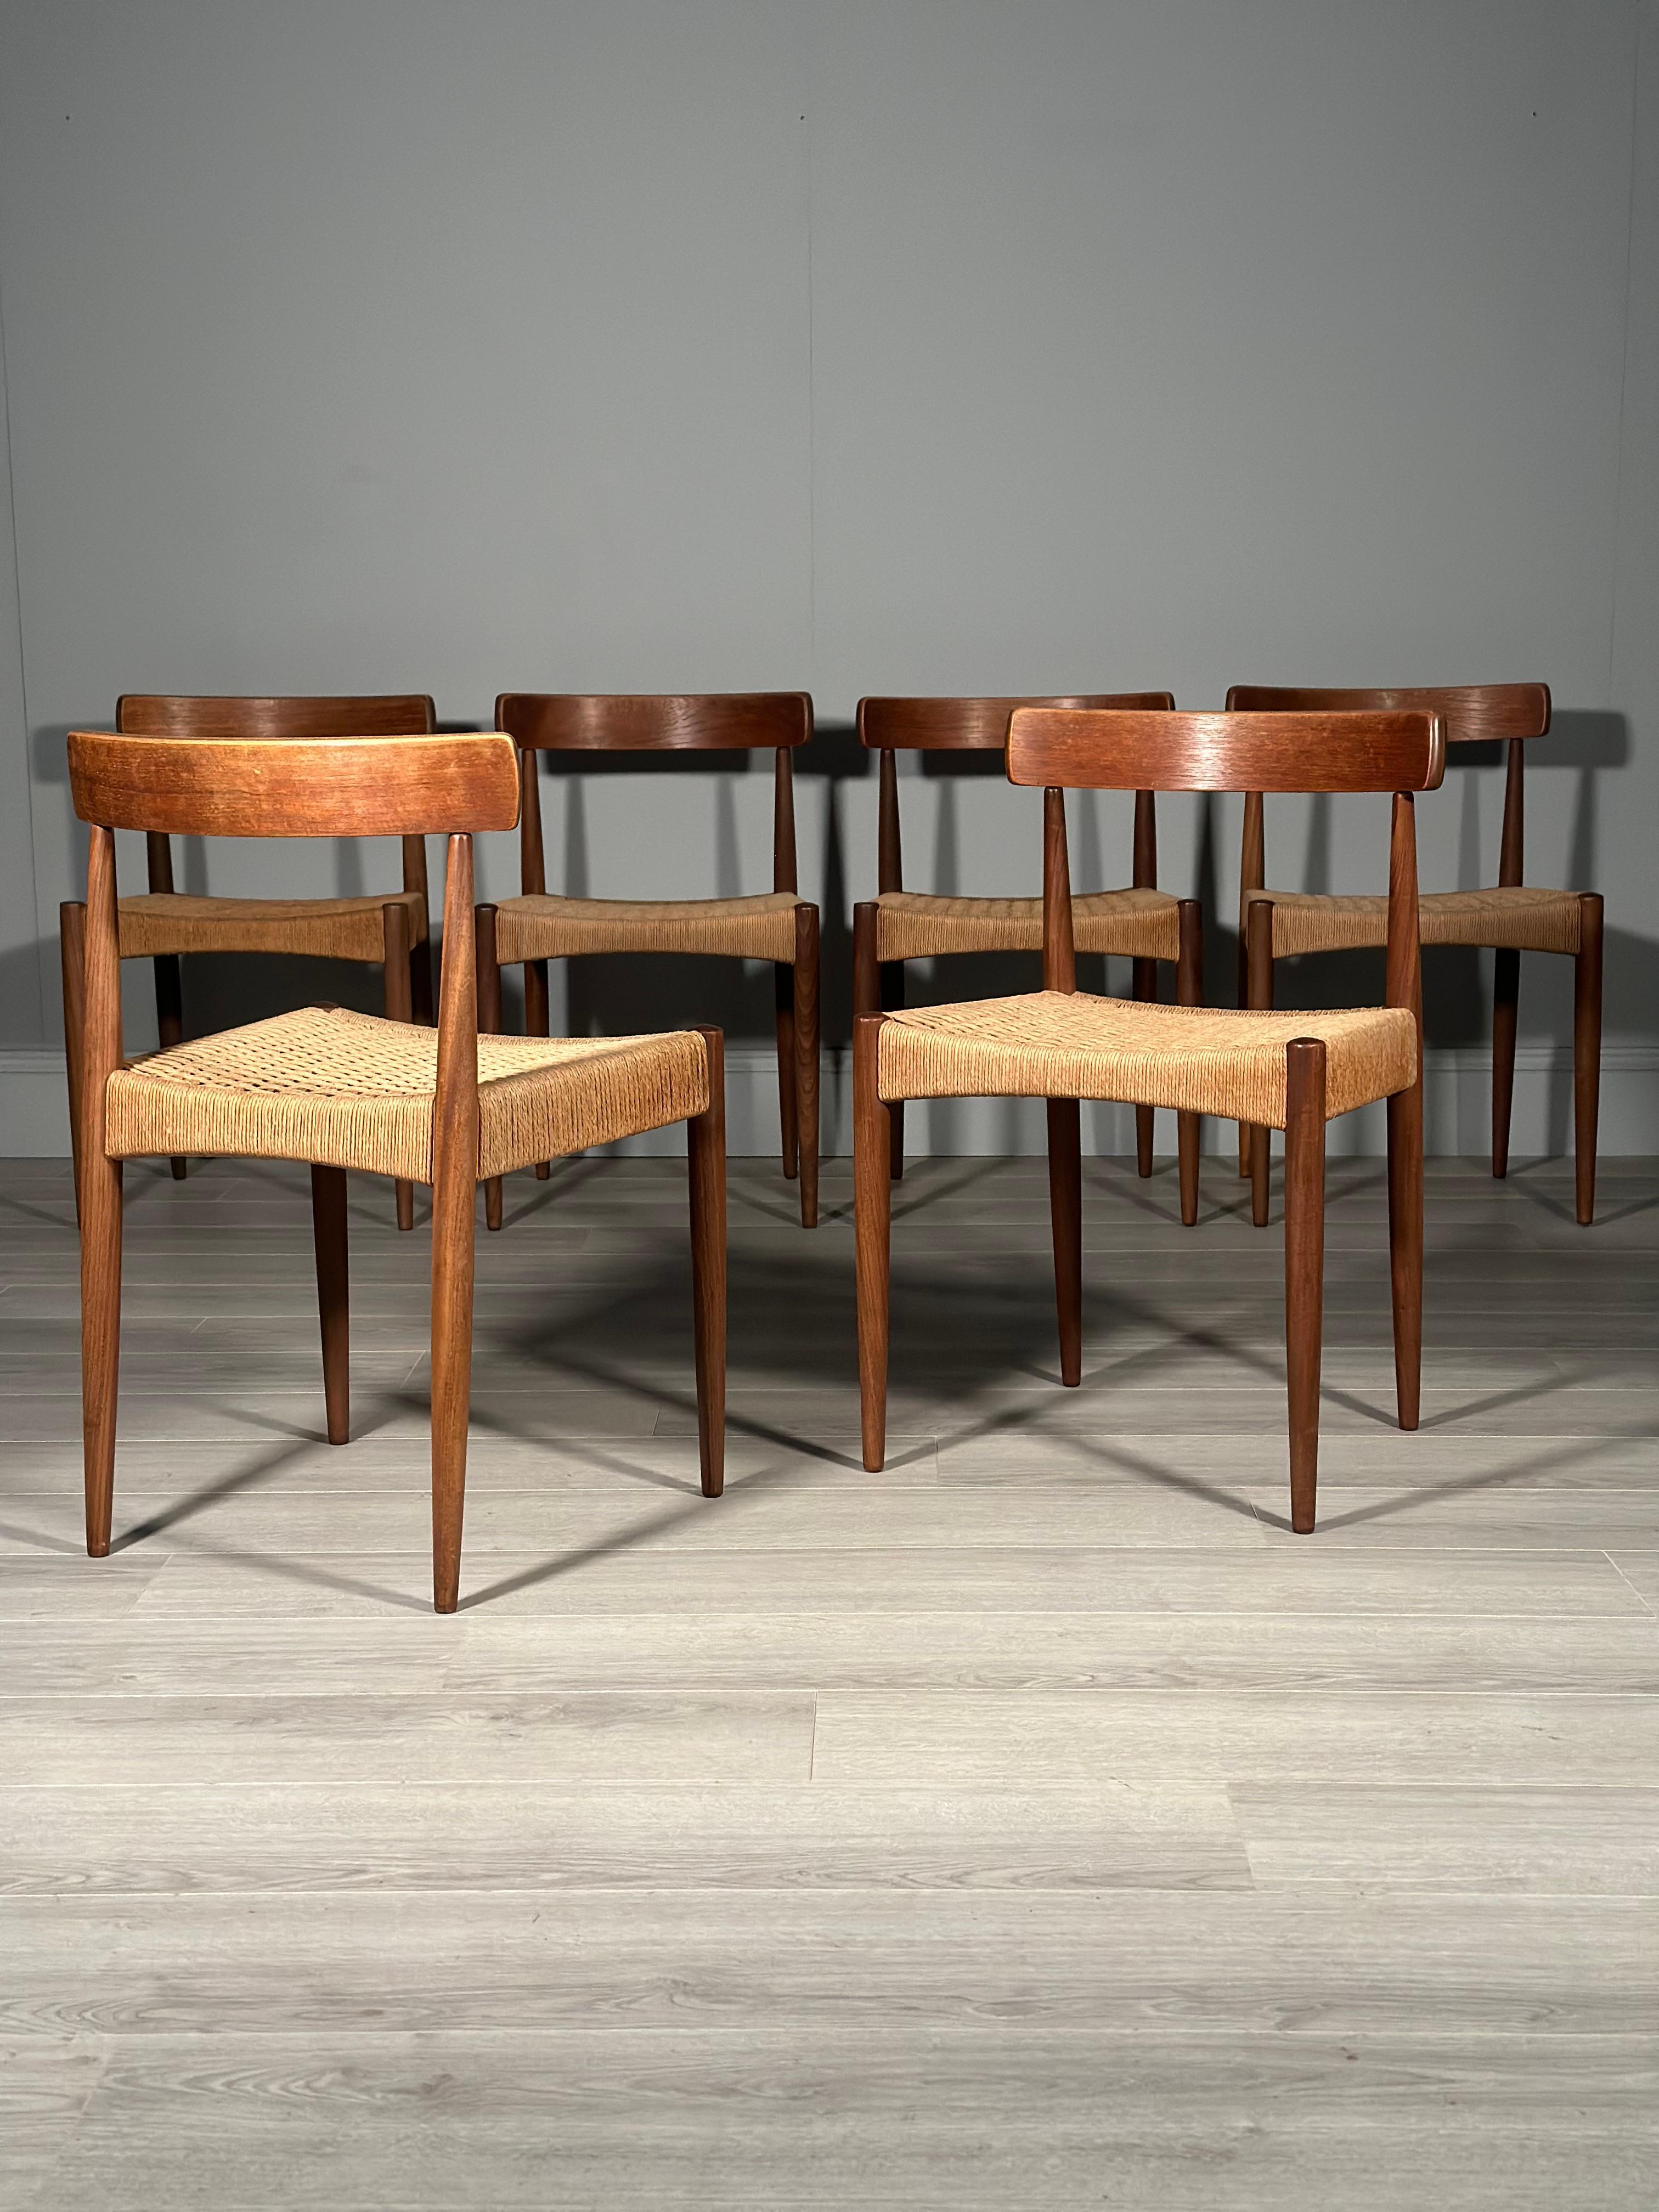 Hand-Crafted Set of 6 Danish Teak And Paper Cord Dining Chairs Designed By Arne Hovmand Olsen For Sale